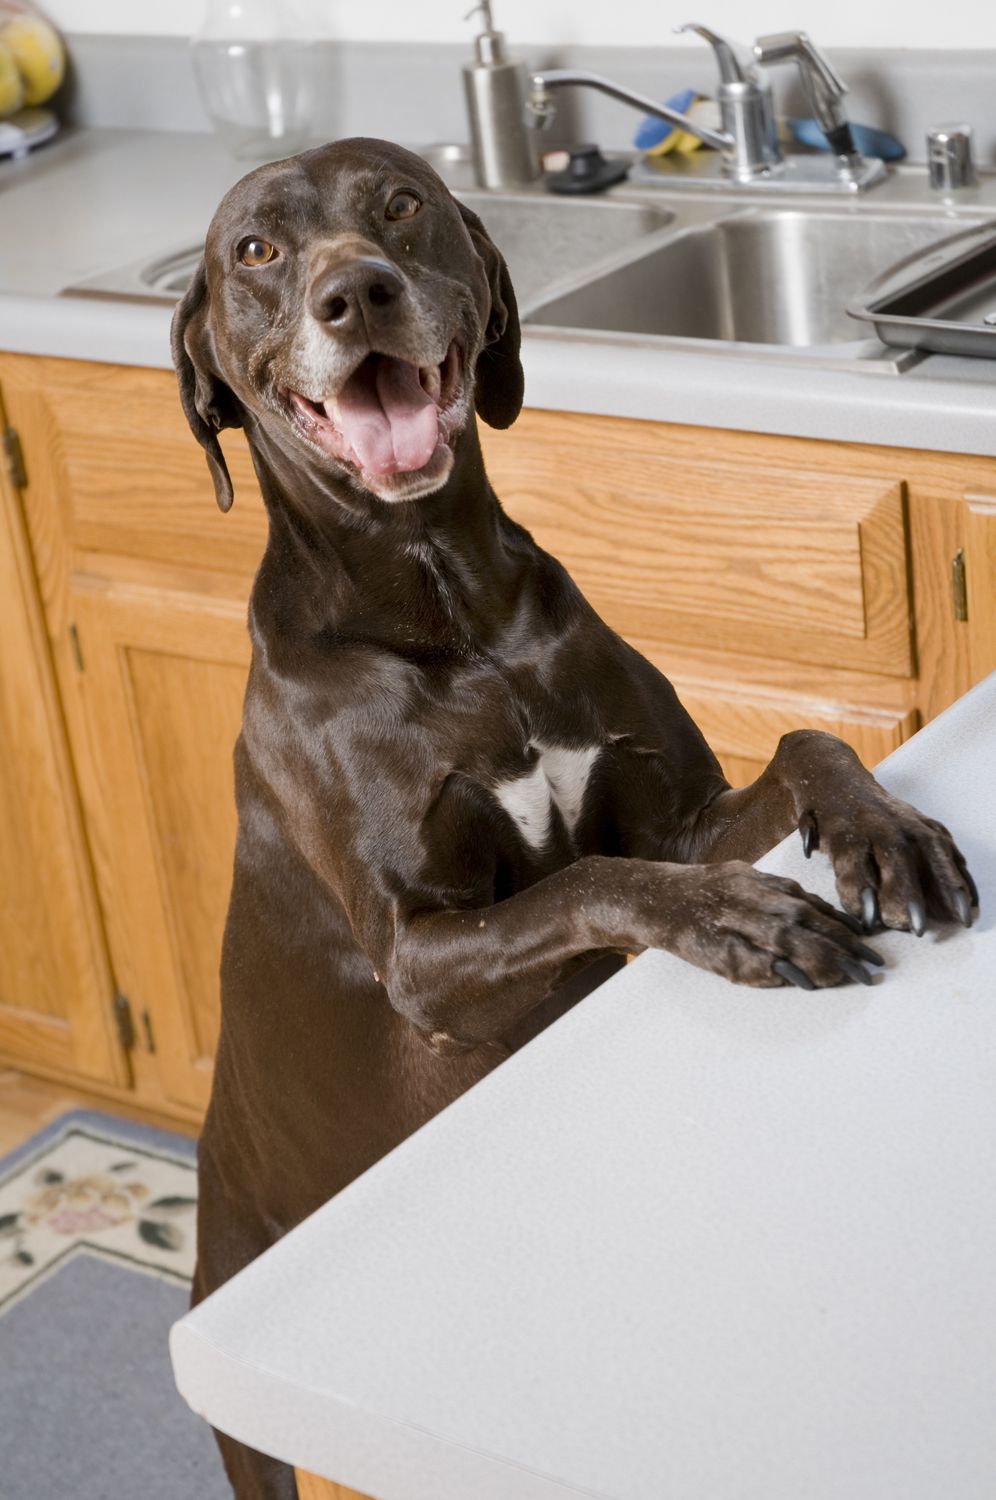 Dog standing up against the kitchen countertop looking for food.